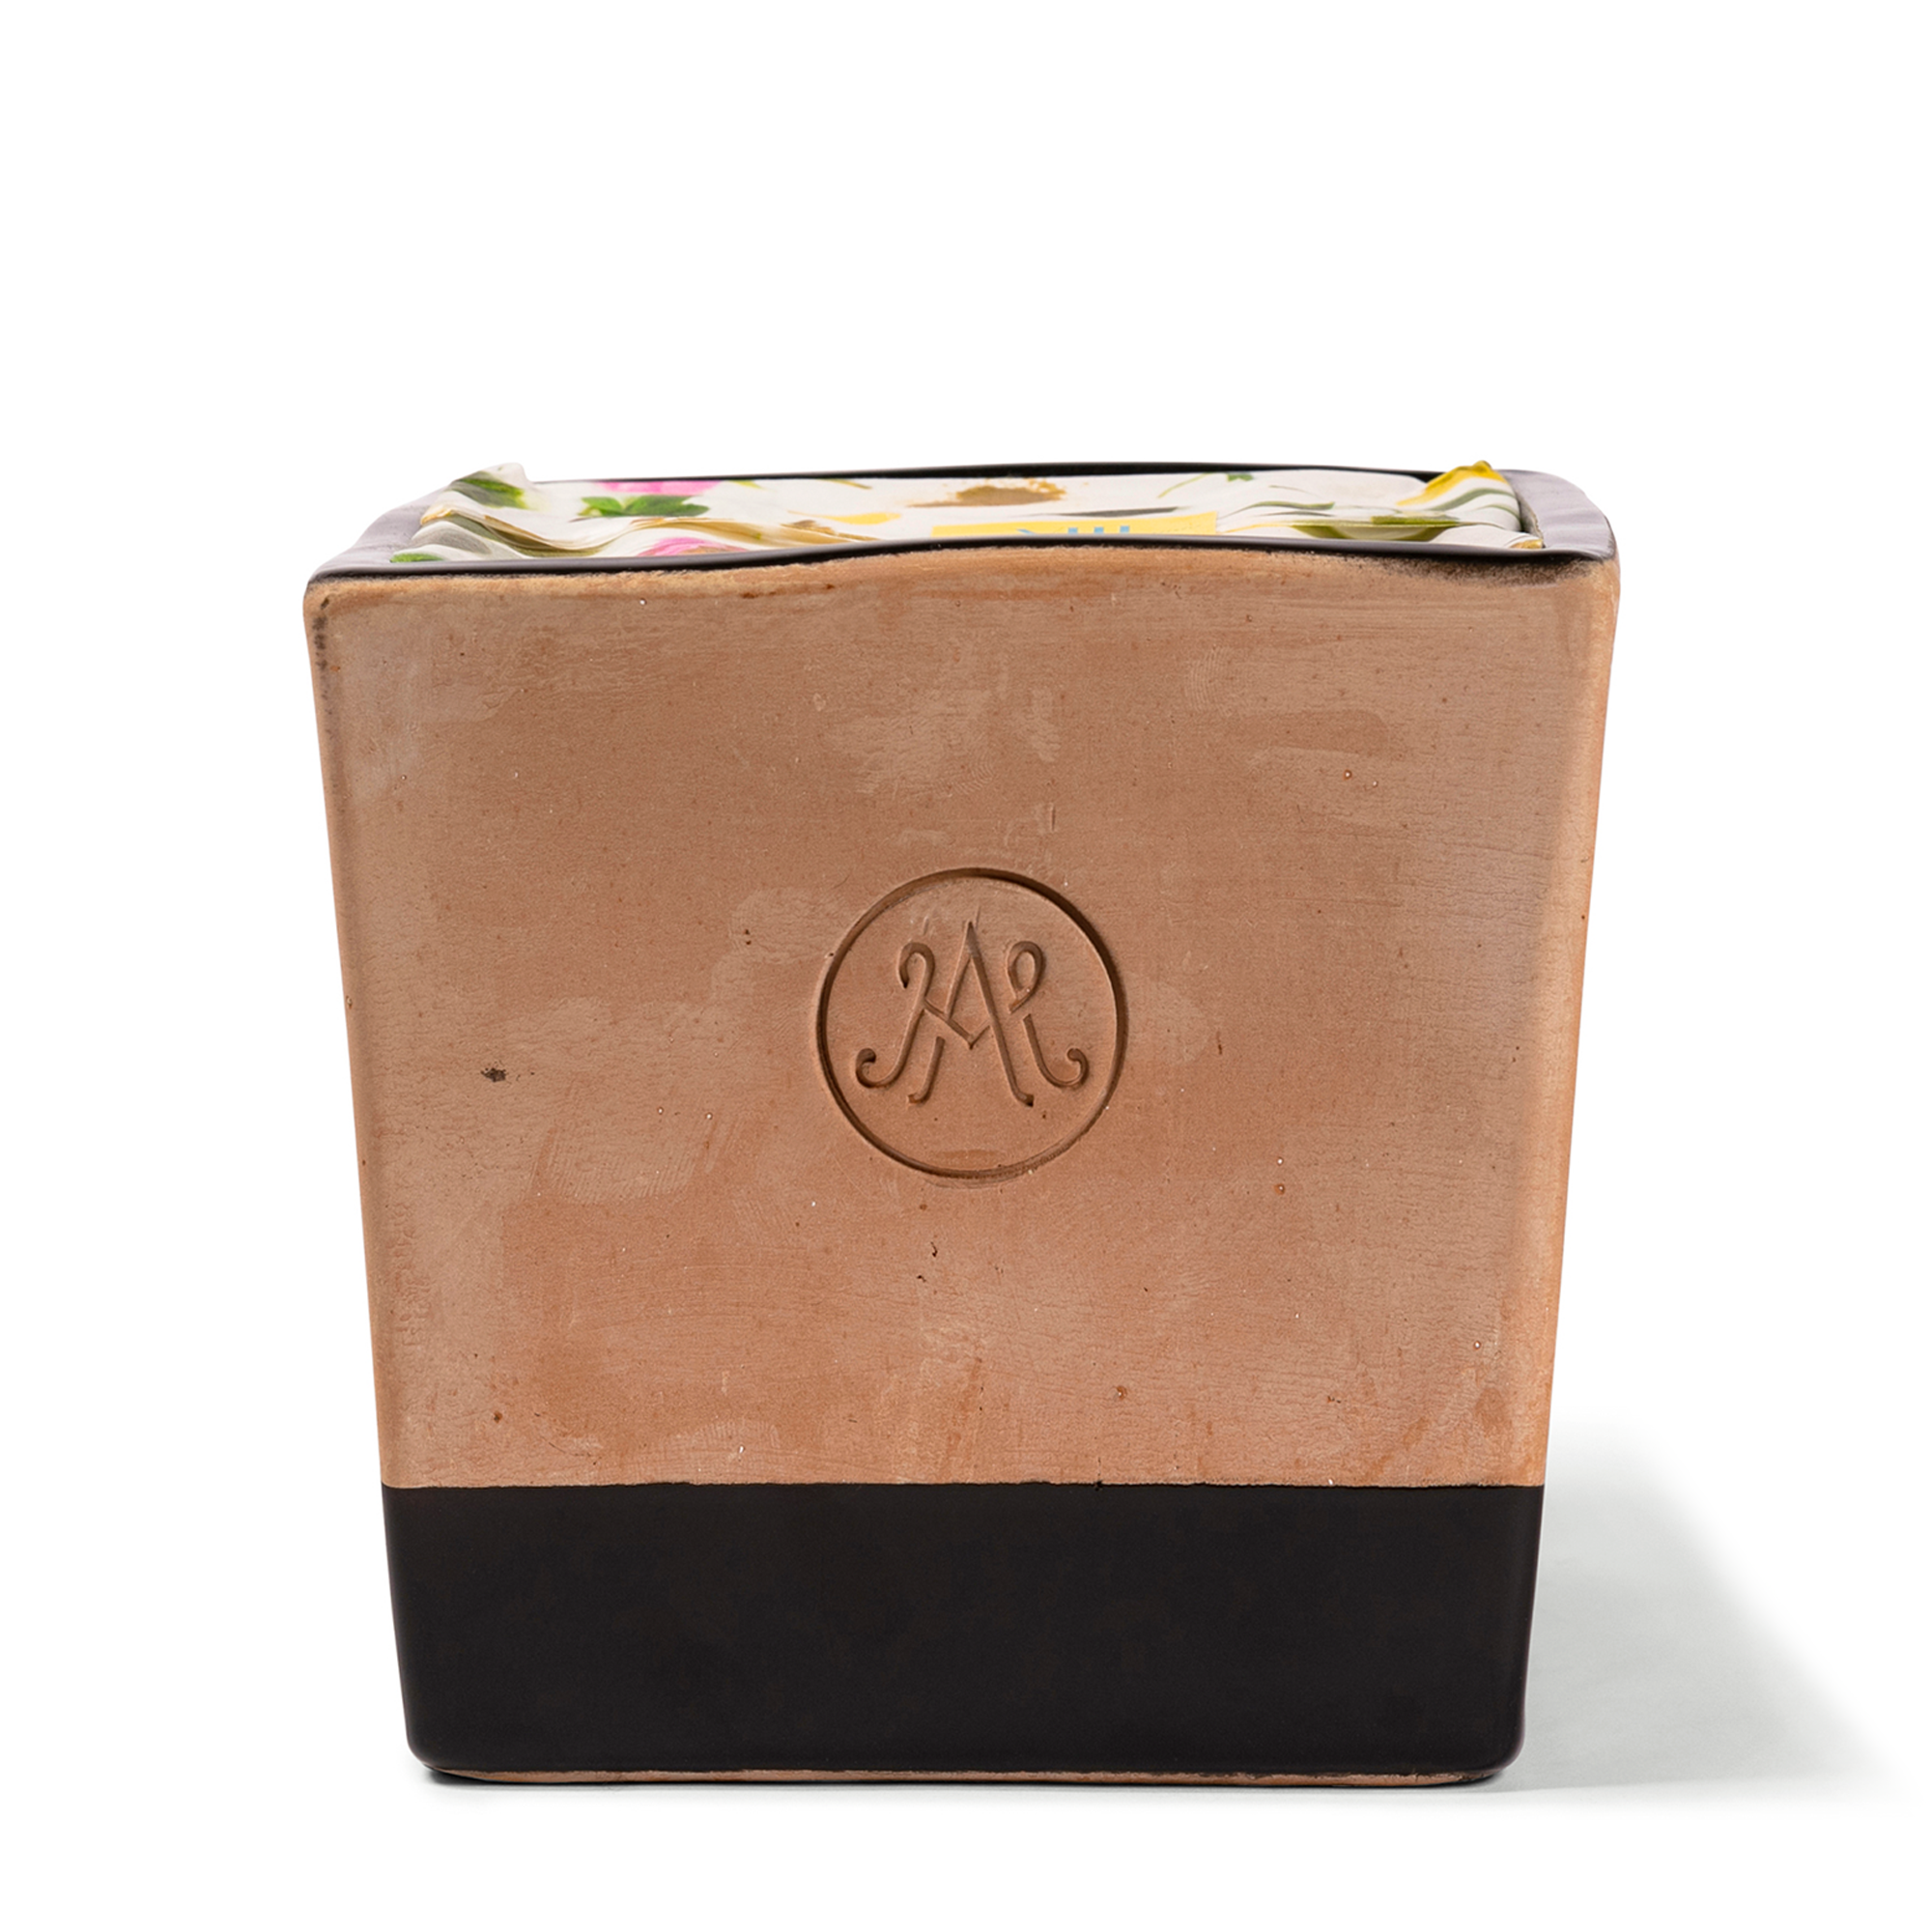 Outdoor Candle in a refillable terracotta and black enamel vessel, scented with green tea, a hint of bergamot, and lemon.